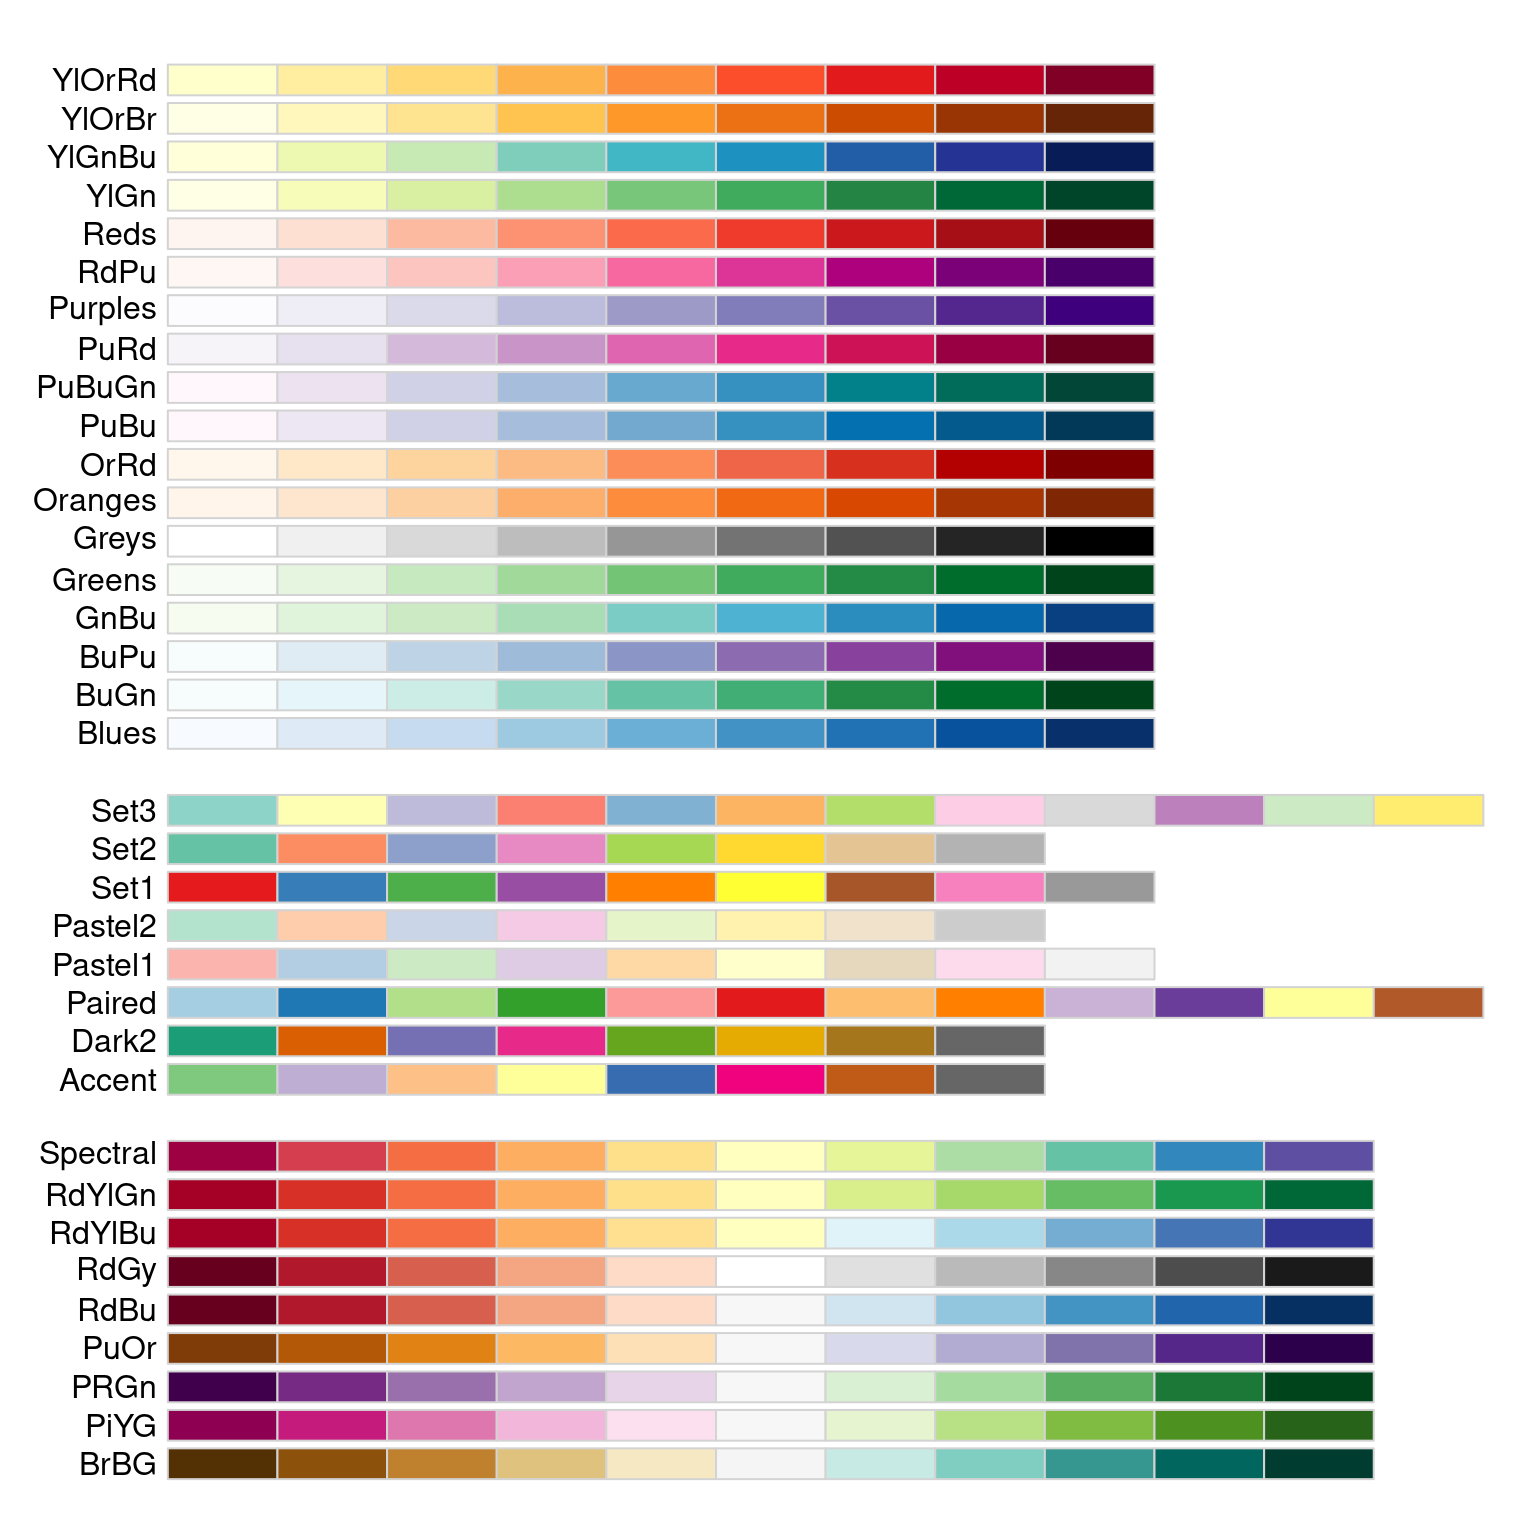 All the ColorBrewer palettes